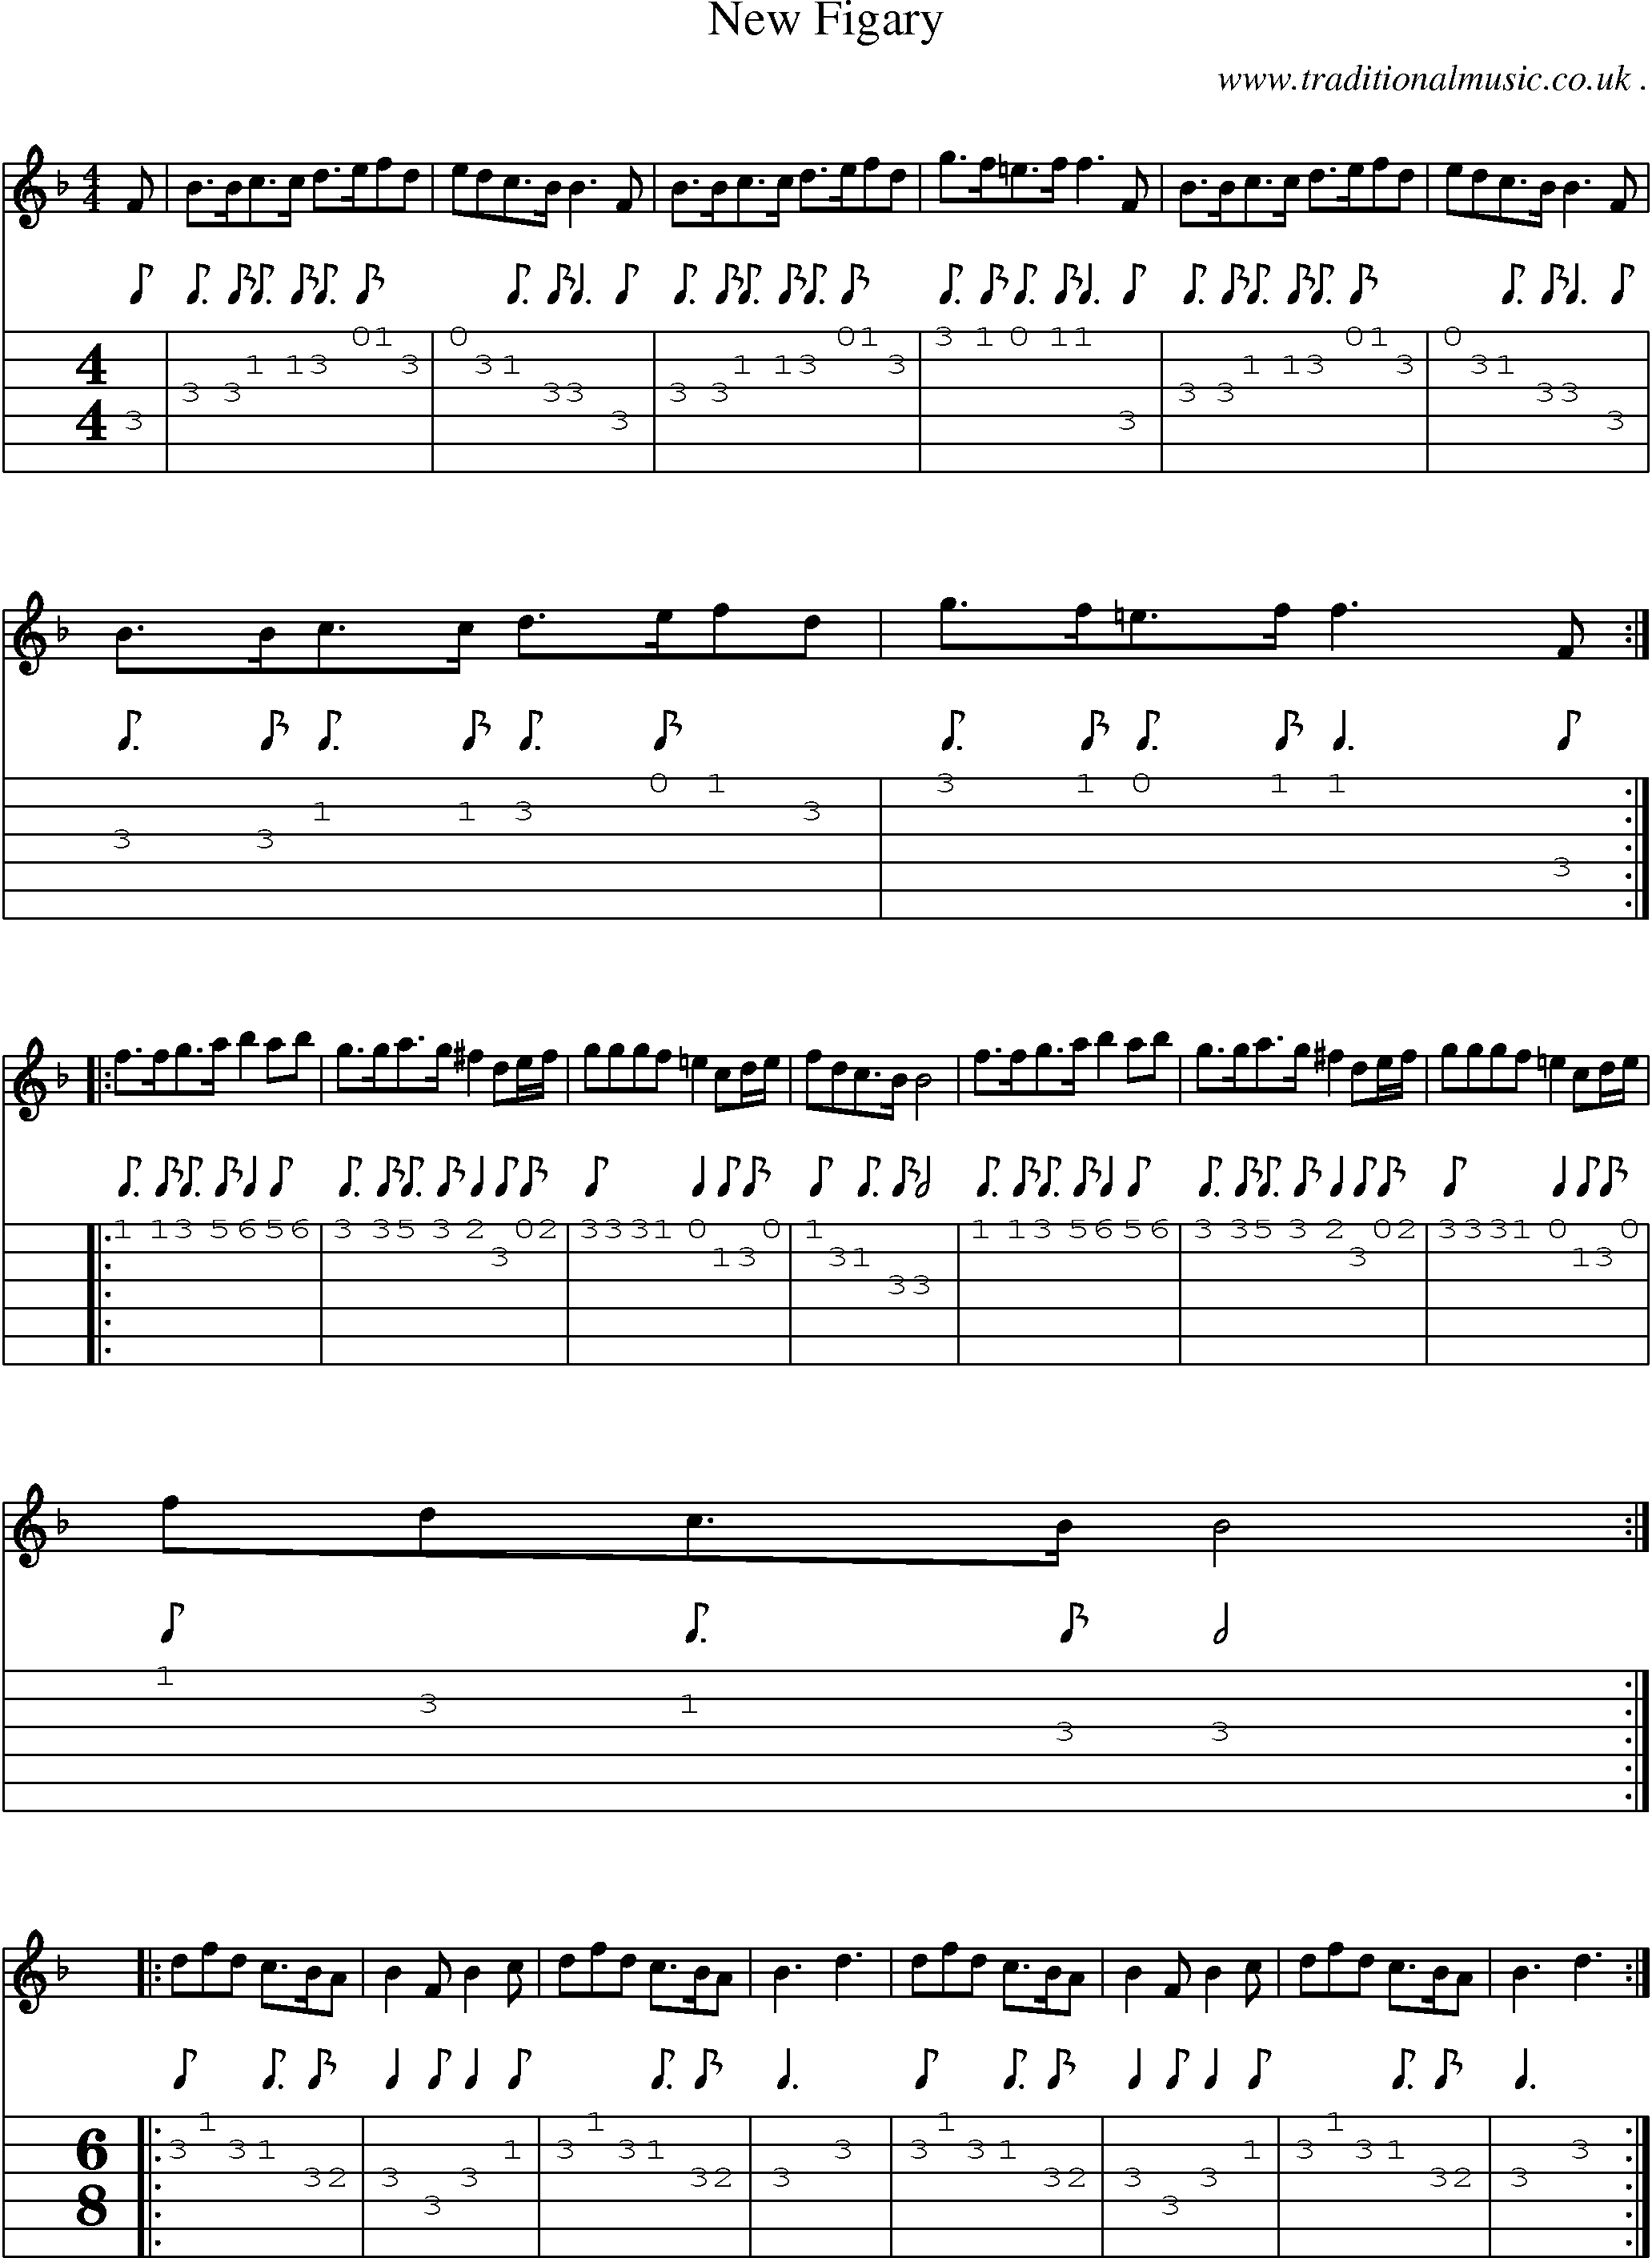 Sheet-Music and Guitar Tabs for New Figary